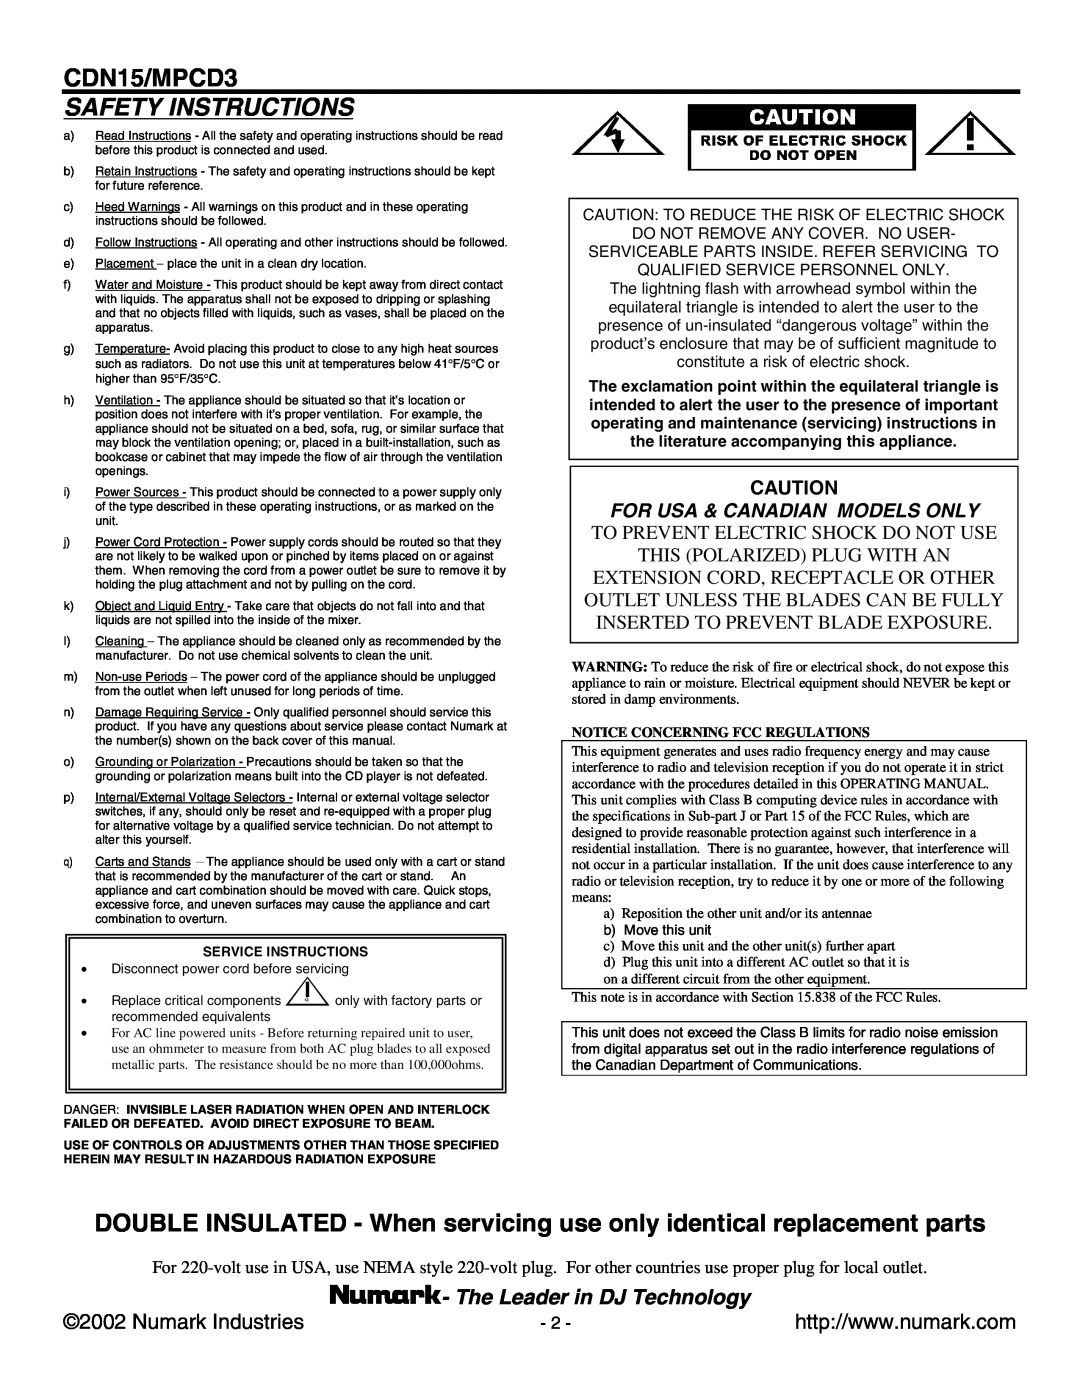 Numark Industries MPCD3, CDN15 user manual Safety Instructions, The Leader in DJ Technology, For Usa & Canadian Models Only 